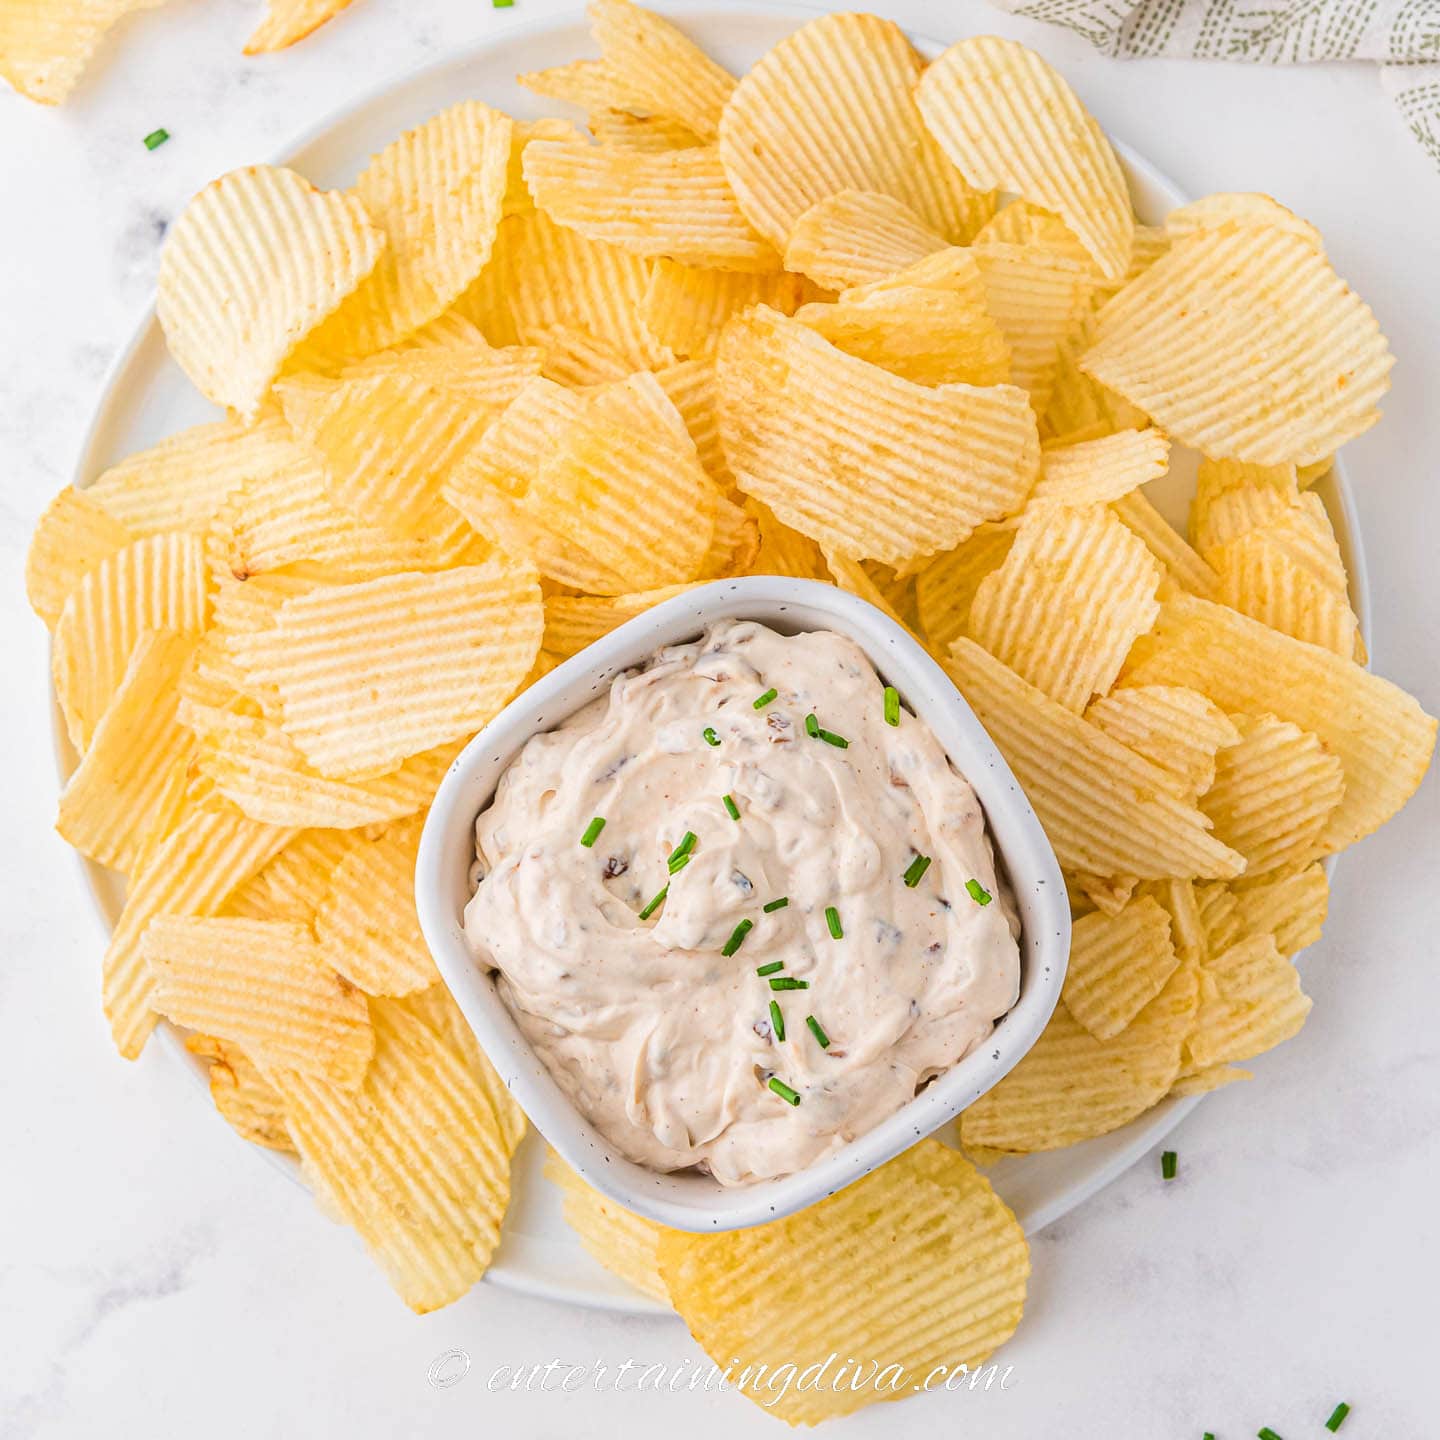 An overhead picture of a plate of chips with a bowl of caramelized onion dip in the middle